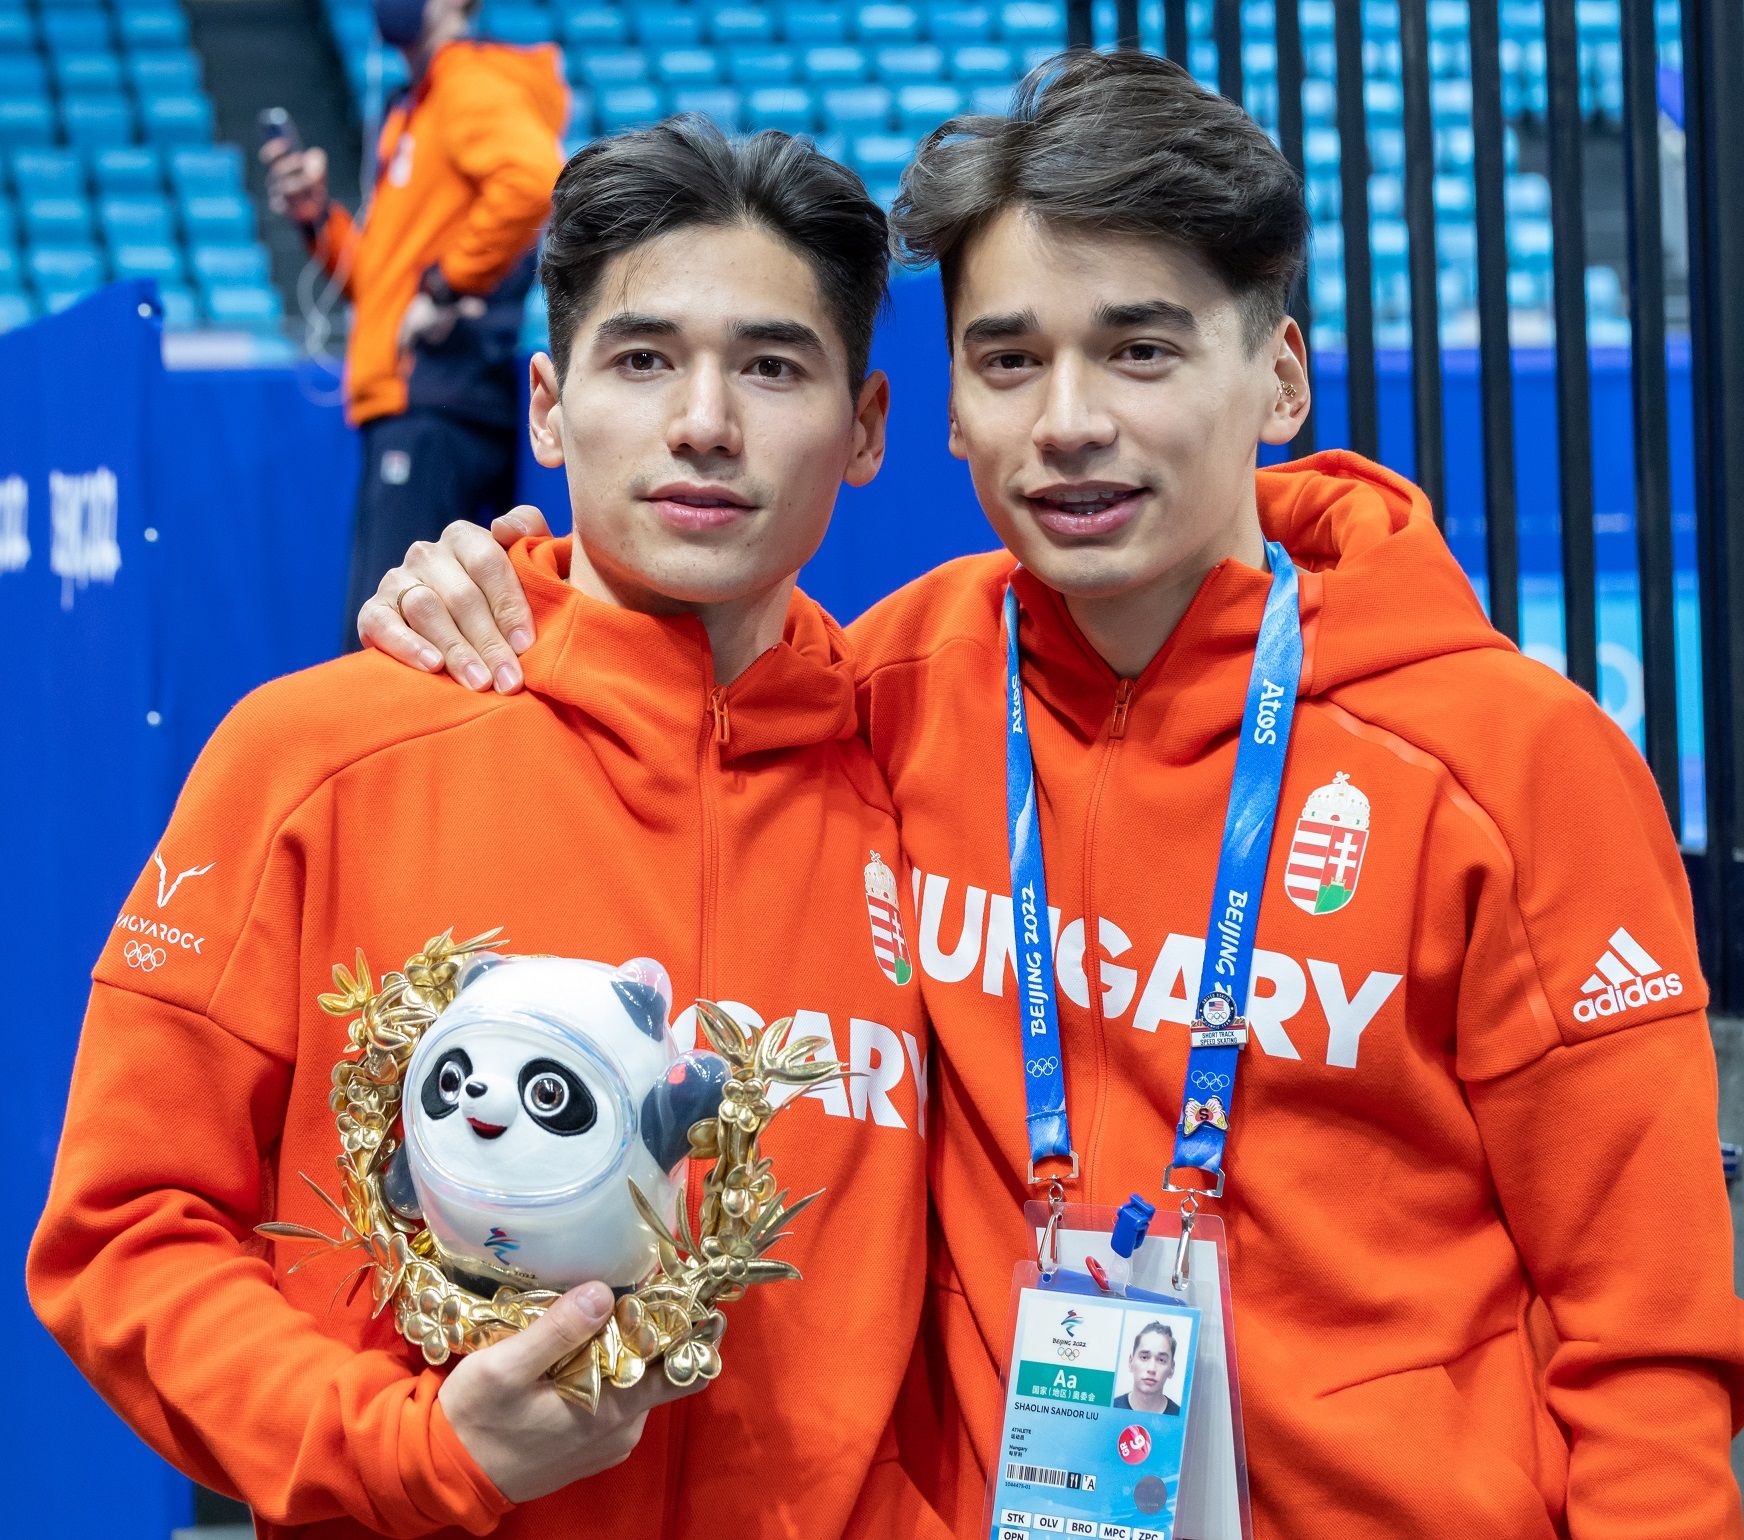 Hungary’s First-Ever Winter Olympics Gold Medal Winning Brothers Ask to Change Country